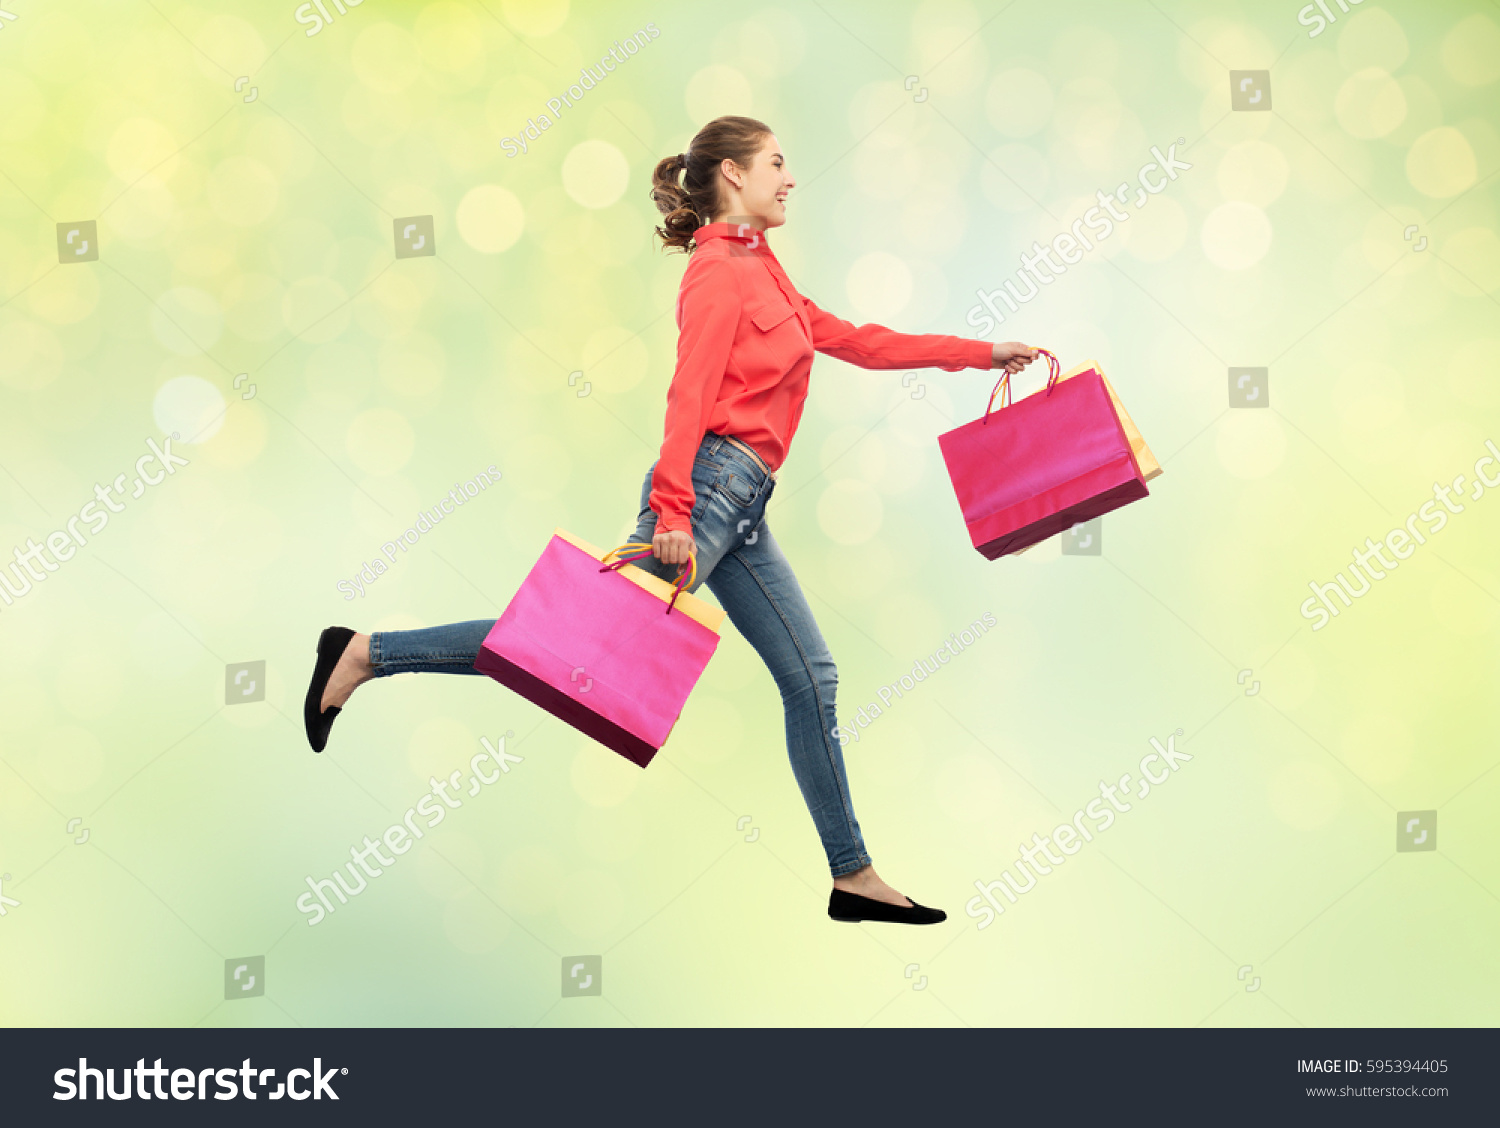 sale, motion and people concept - smiling young woman with shopping bags running in air over summer green lights background #595394405